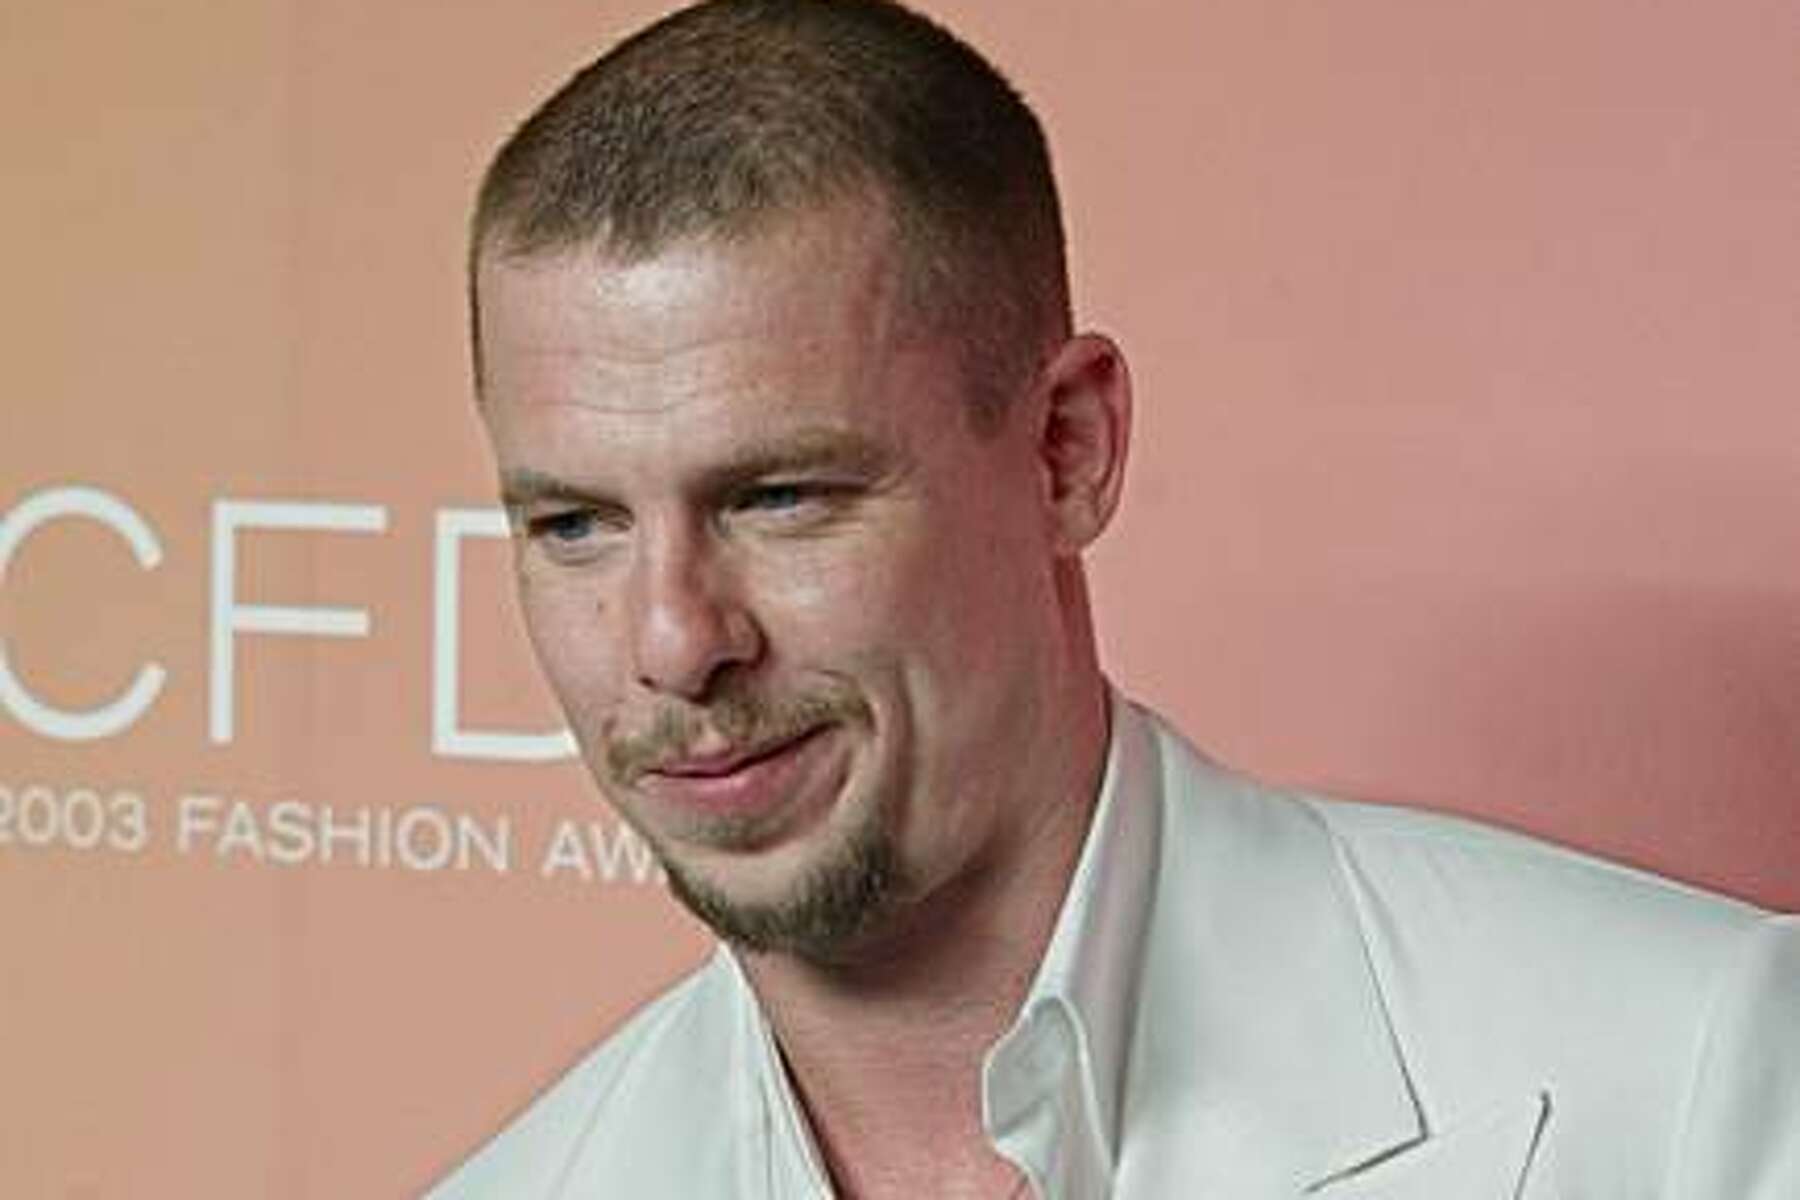 McQueen found dead on eve of his mother's funeral, The Independent